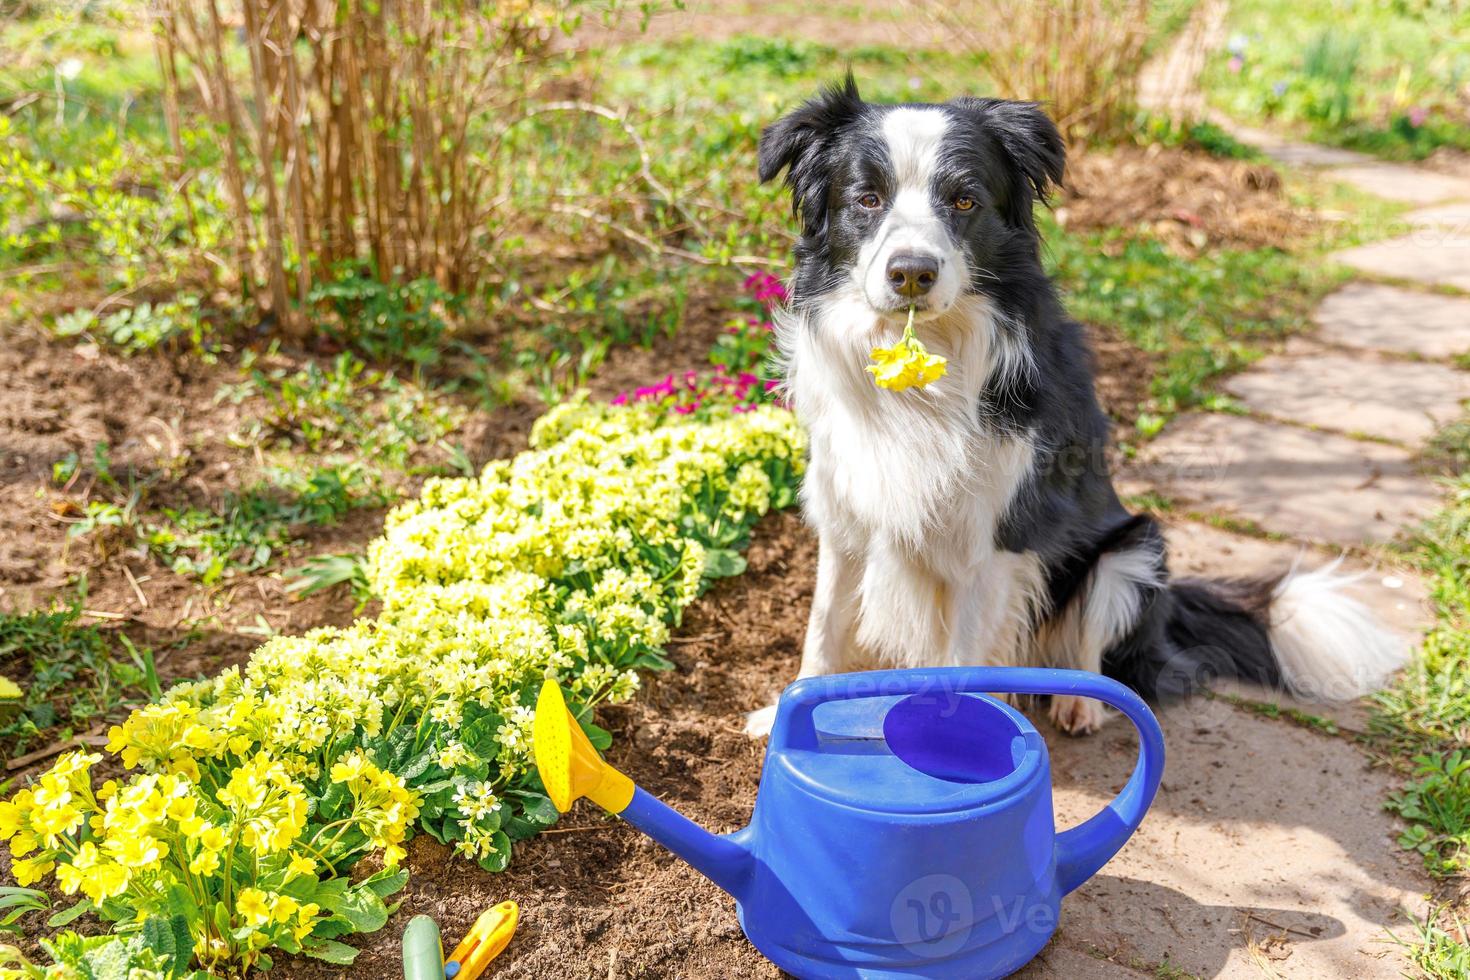 Outdoor portrait of cute dog border collie with watering can in garden background. Funny puppy dog as gardener fetching watering can for irrigation. Gardening and agriculture concept. photo